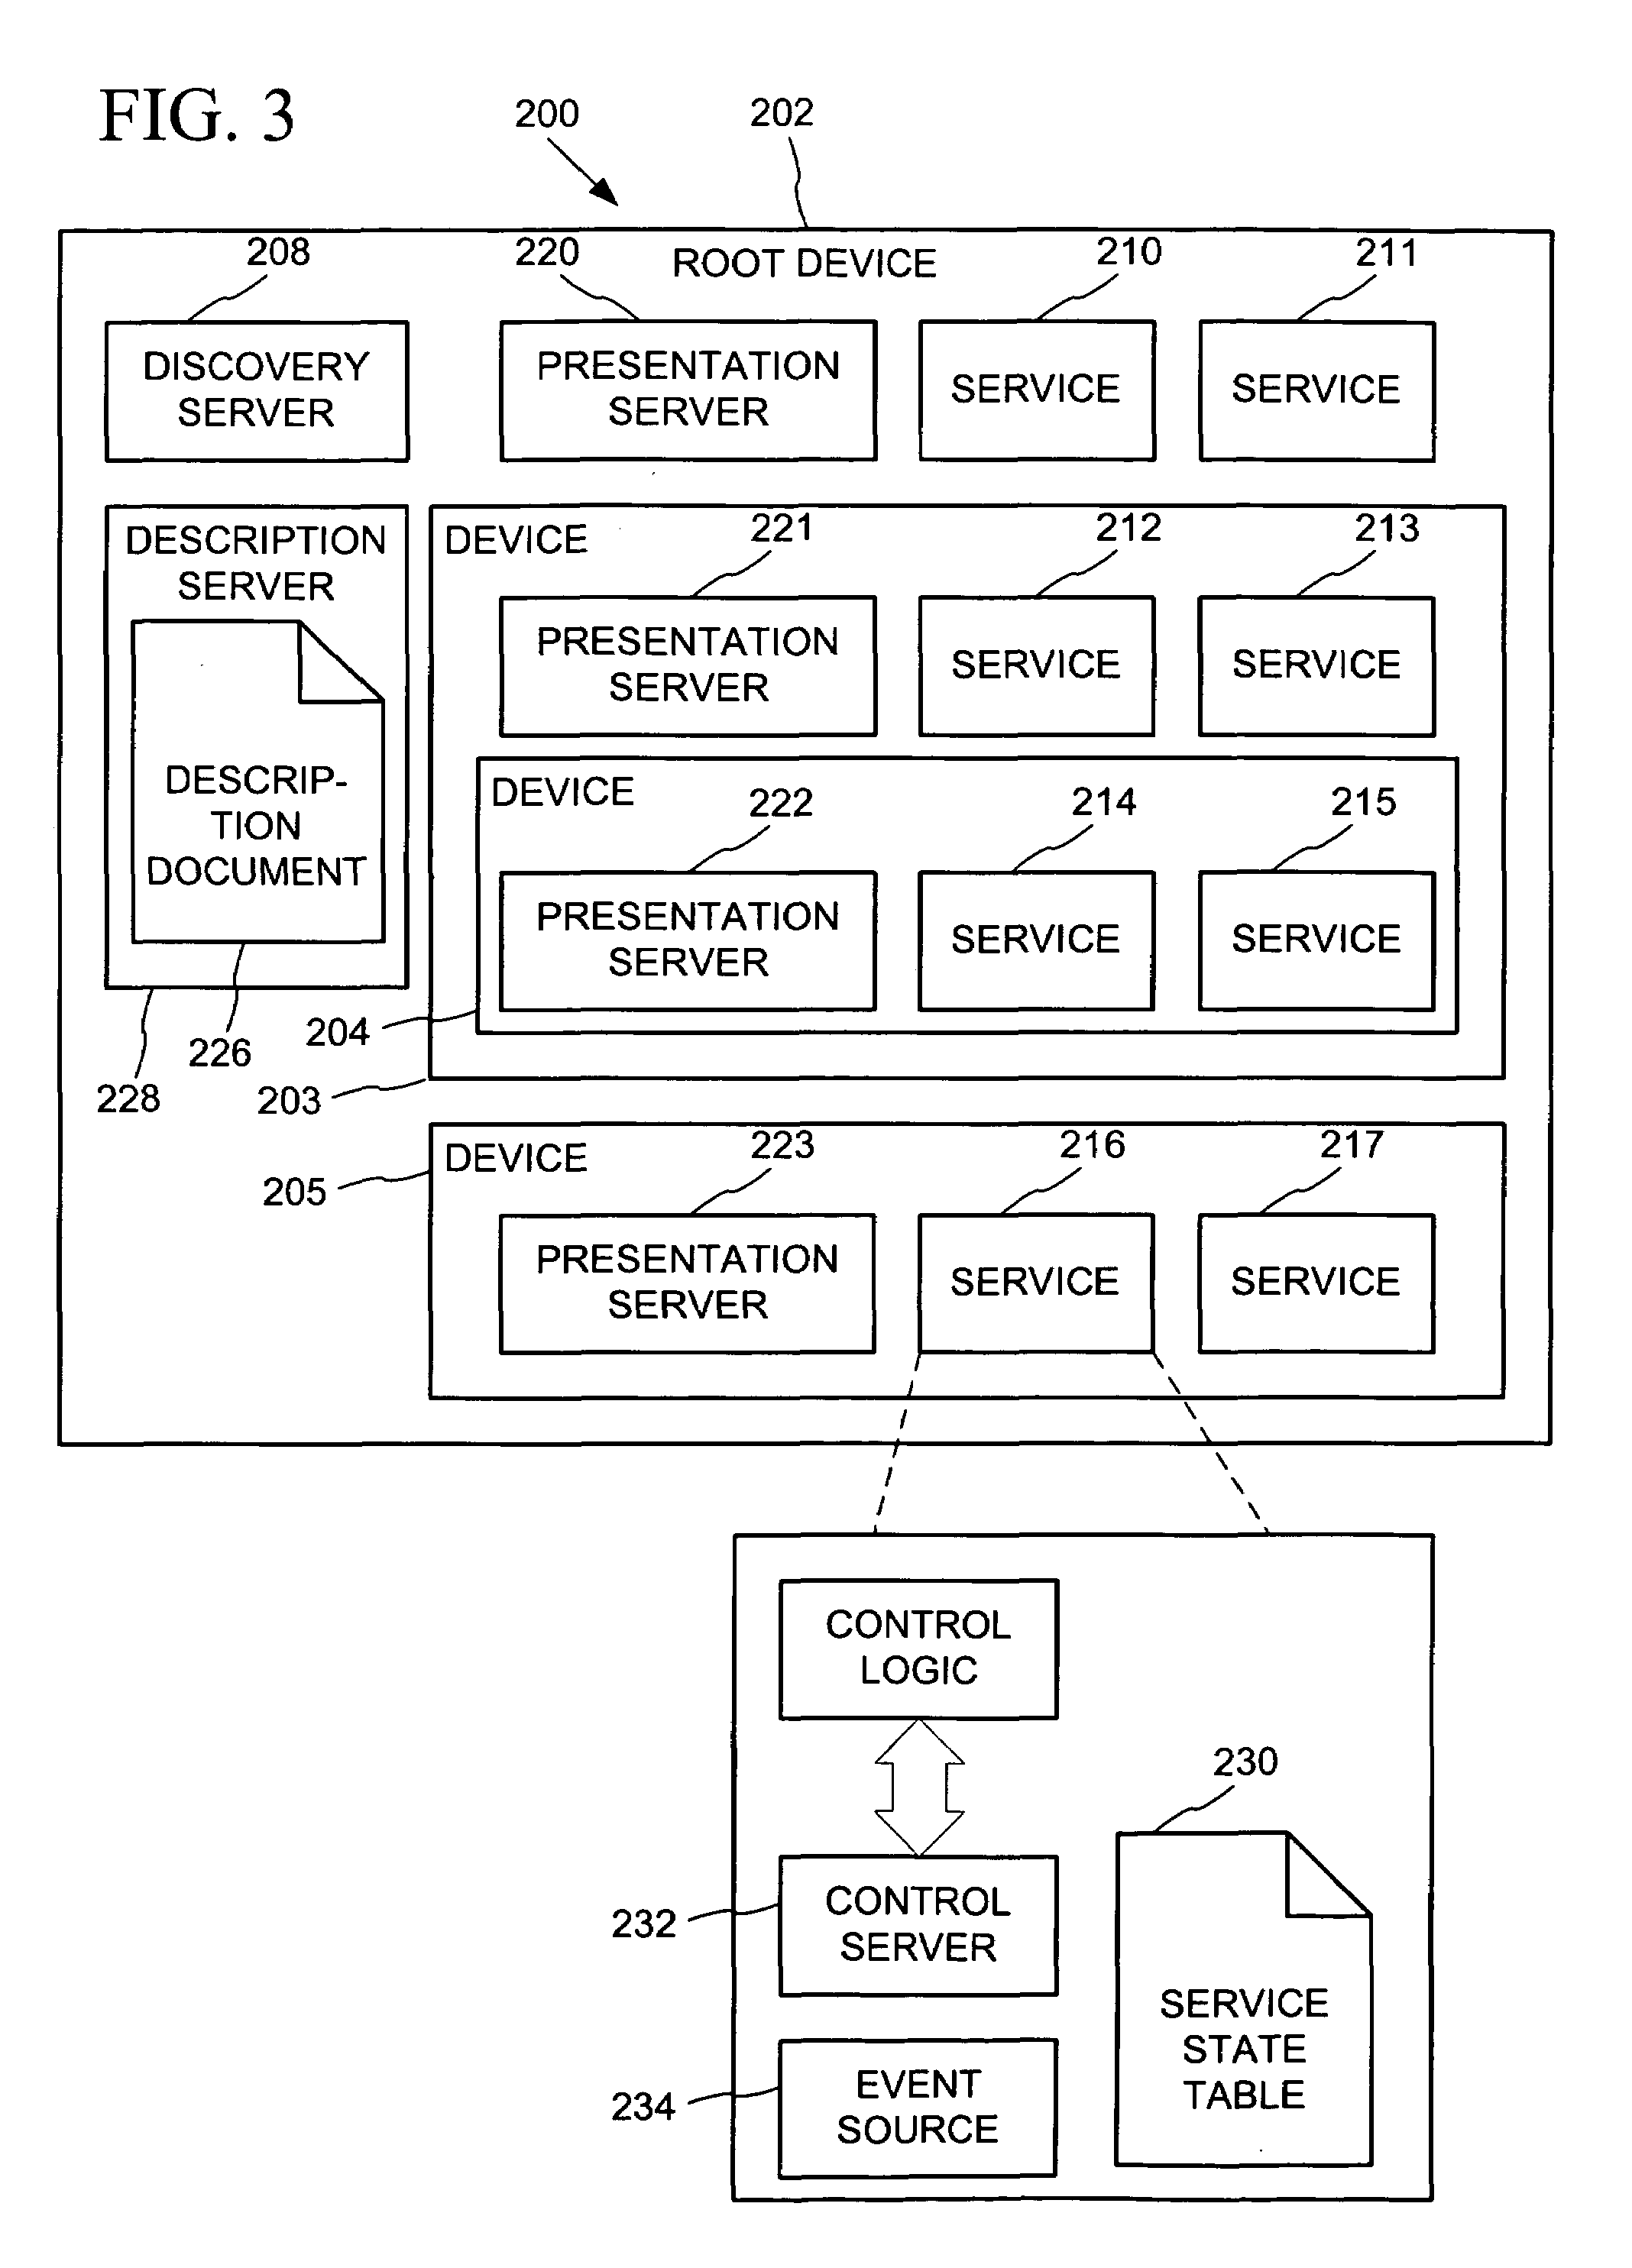 Data driven remote device control model with general programming interface-to-network messaging adapter